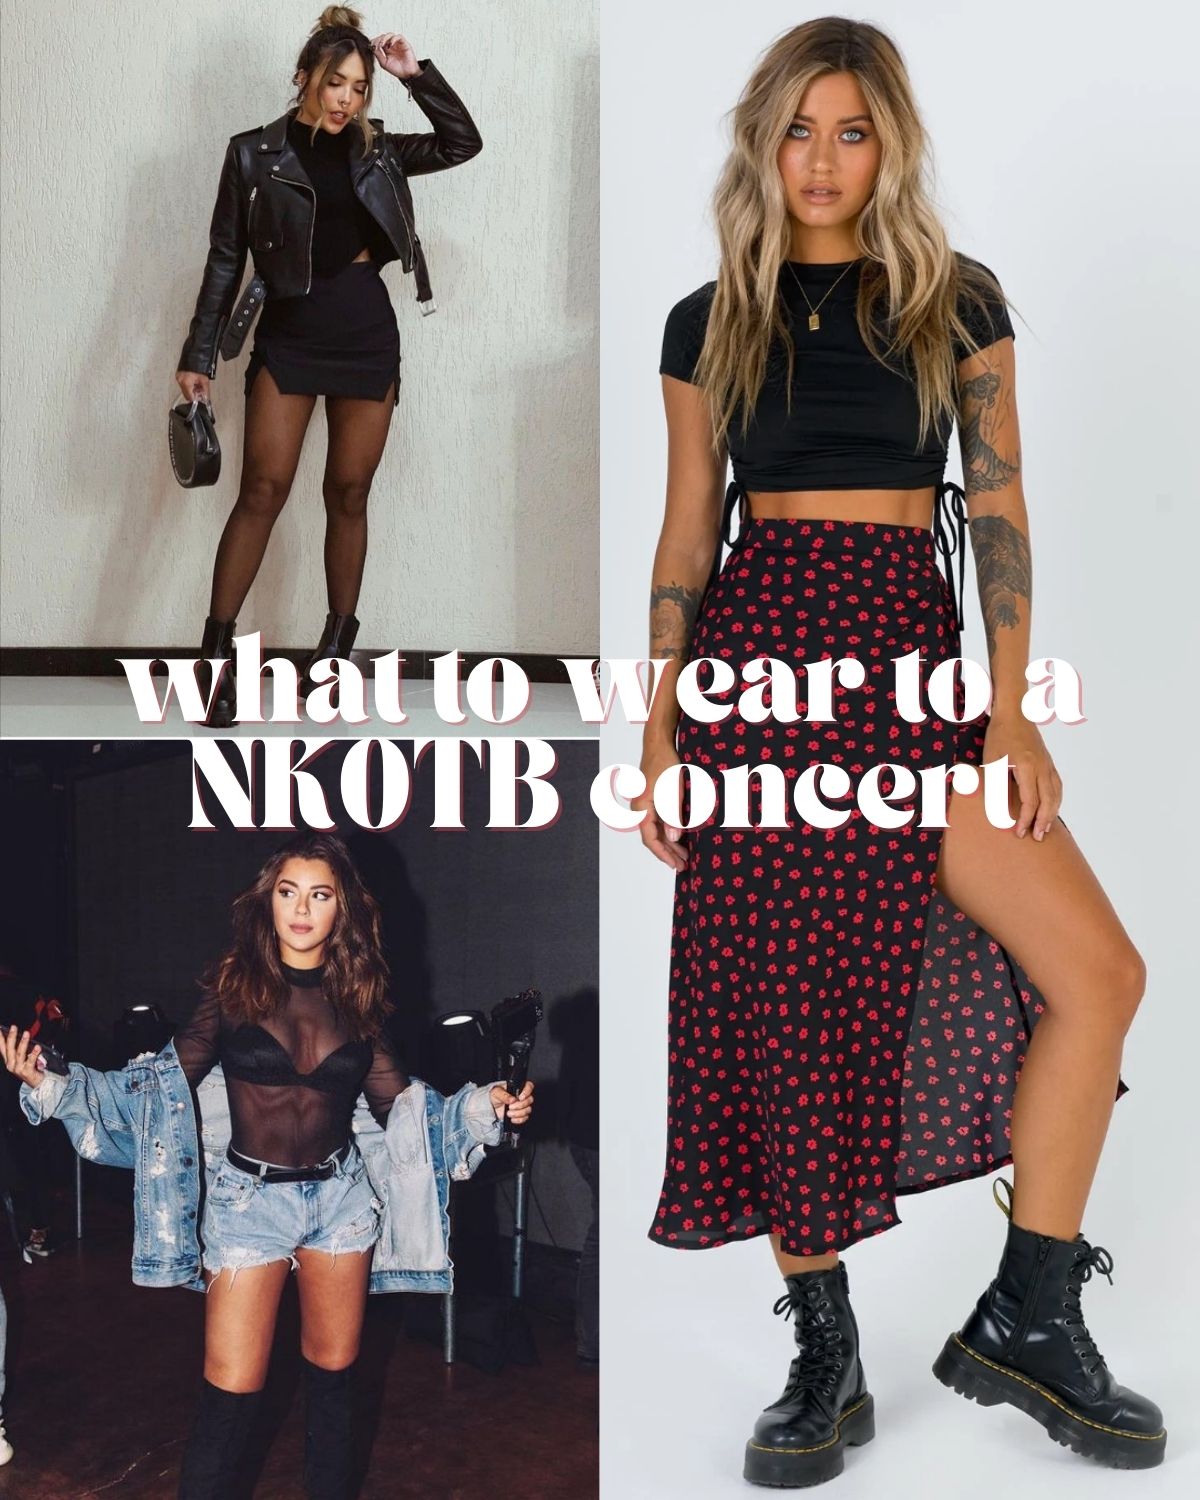 Three grunge outfits - what to wear to nkotb concert